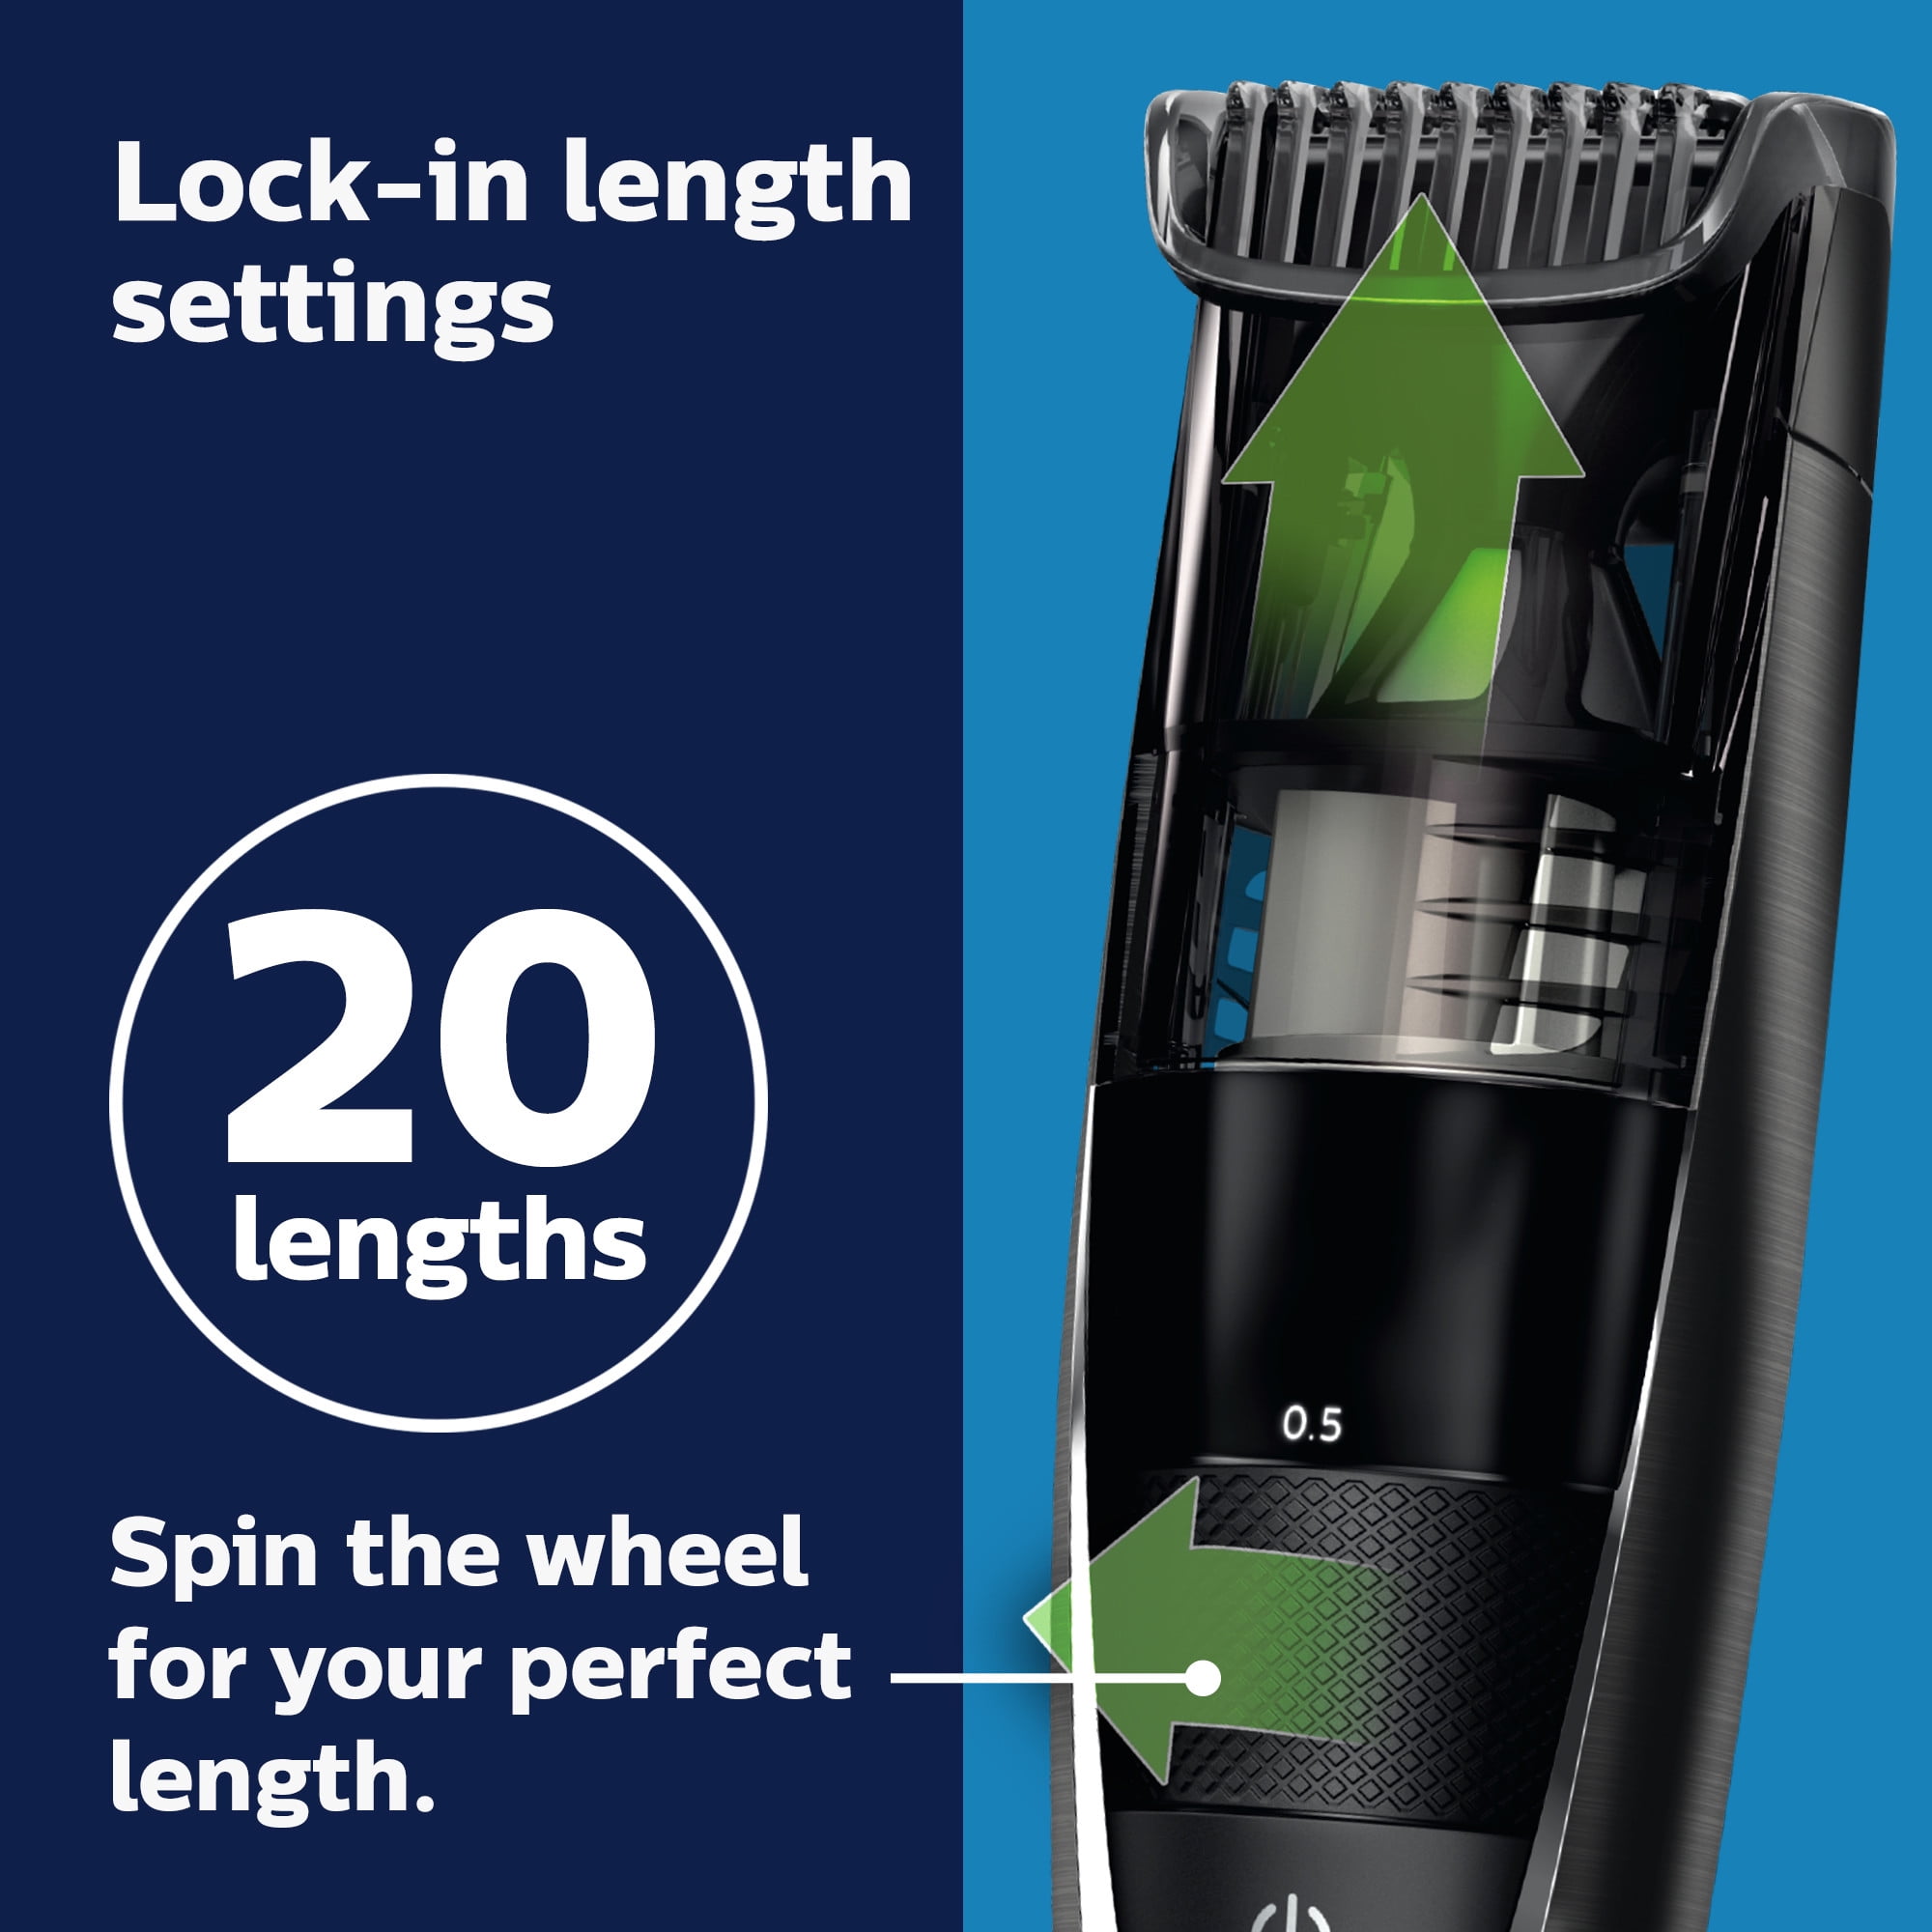 Philips Norelco Beard Trimmer Series 7500, Premium Beard Trimmer with Power Vacuum, Blades, Ergonomic Easy Grip, Cordless, and Washable Features - No Blade Oil - Bt7517/49. - Walmart.com